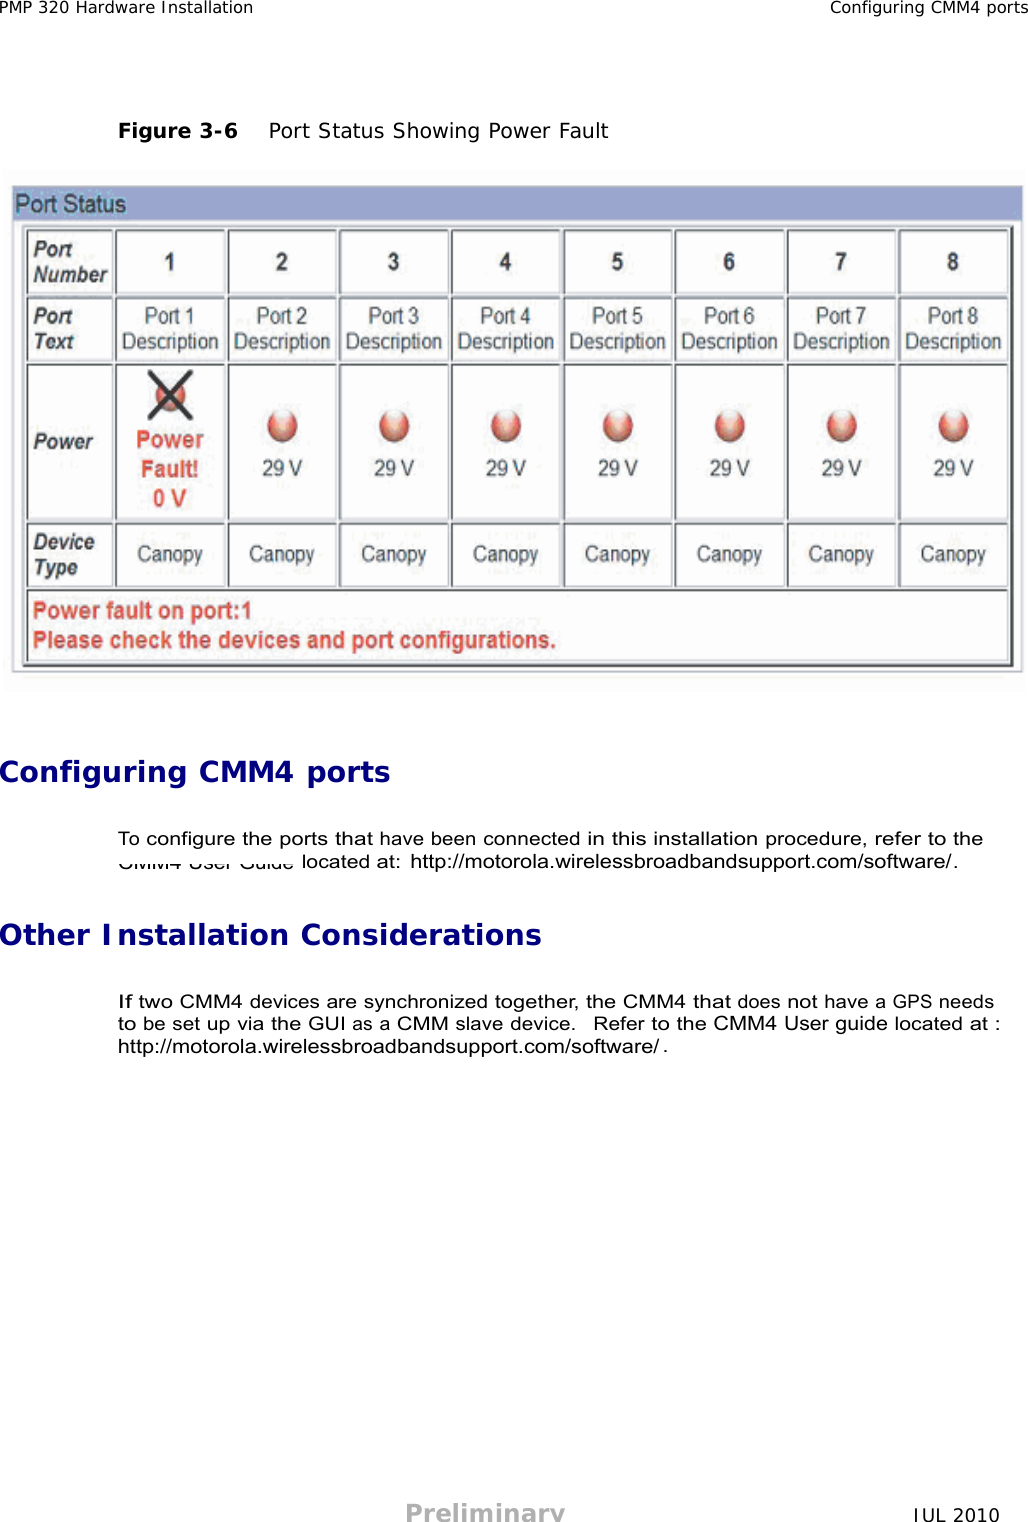 Preliminary JUL 2010     CMM4 User Guide PMP 320 Hardware Installation Configuring CMM4 ports      Figure 3-6   Port Status Showing Power Fault      Configuring CMM4 ports   To configure the ports that have been connected in this installation procedure, refer to the located at: . http://motorola.wirelessbroadbandsupport.com/software/   Other Installation Considerations   If two CMM4 devices are synchronized together, the CMM4 that does not have a GPS needs to be set up via the GUI as a CMM slave device.  Refer to the CMM4 User guide located at : . http://motorola.wirelessbroadbandsupport.com/software/ 